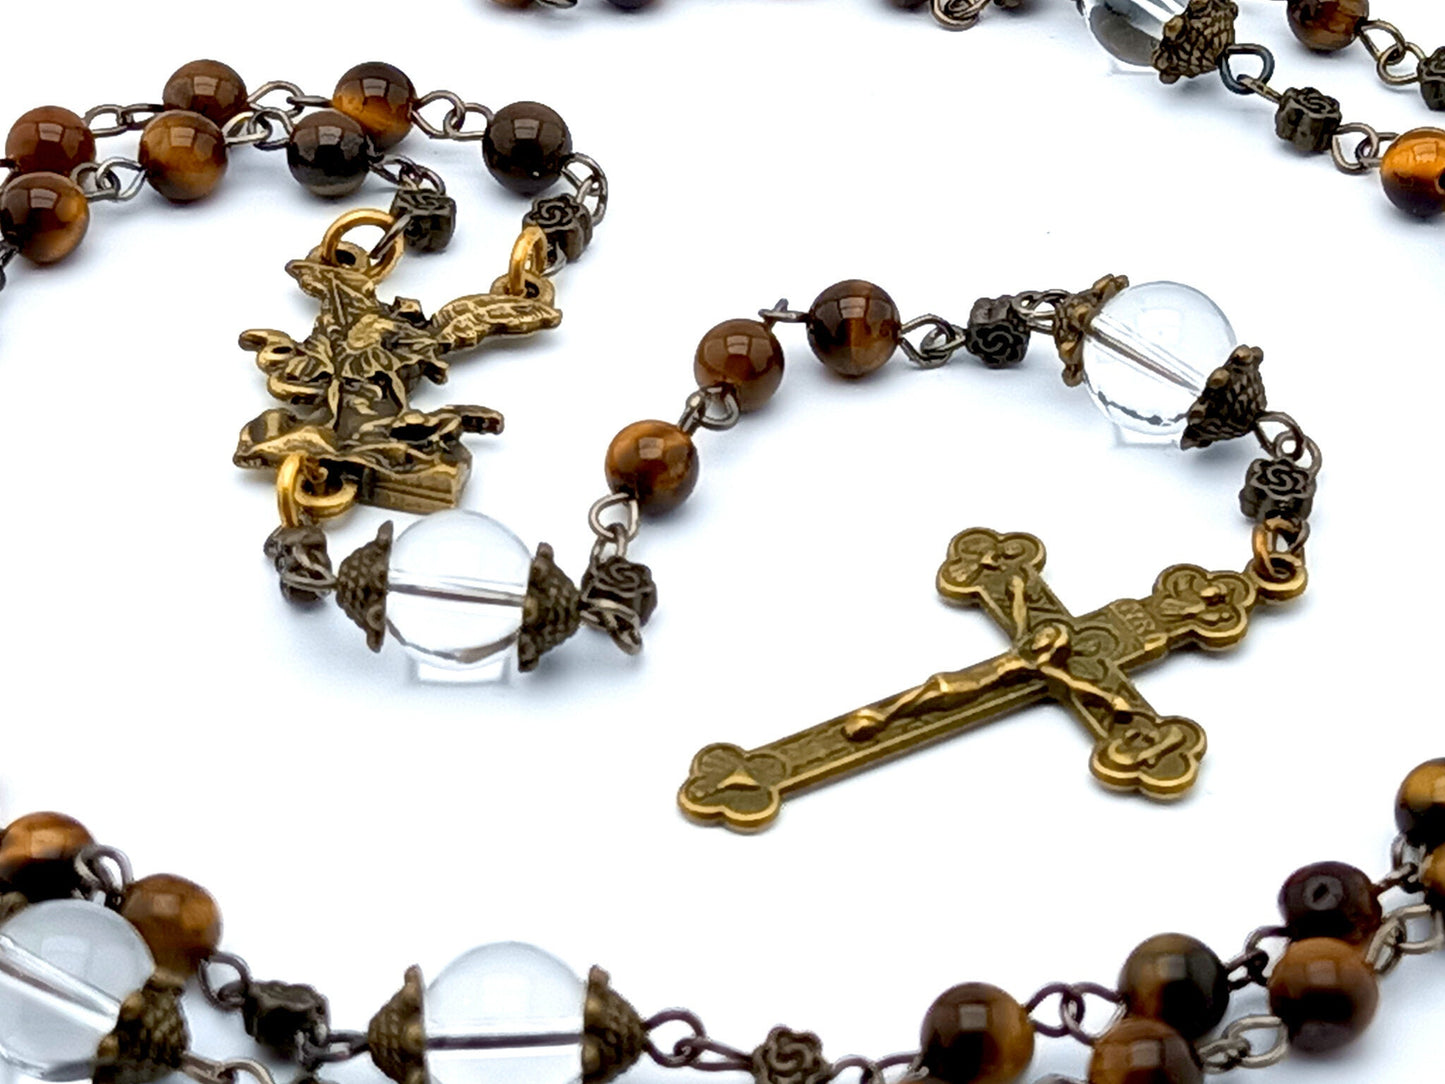 Saint Michael unique rosary beads with tigers eyes gemstone and glass beads, bronze crucifix and centre medal.